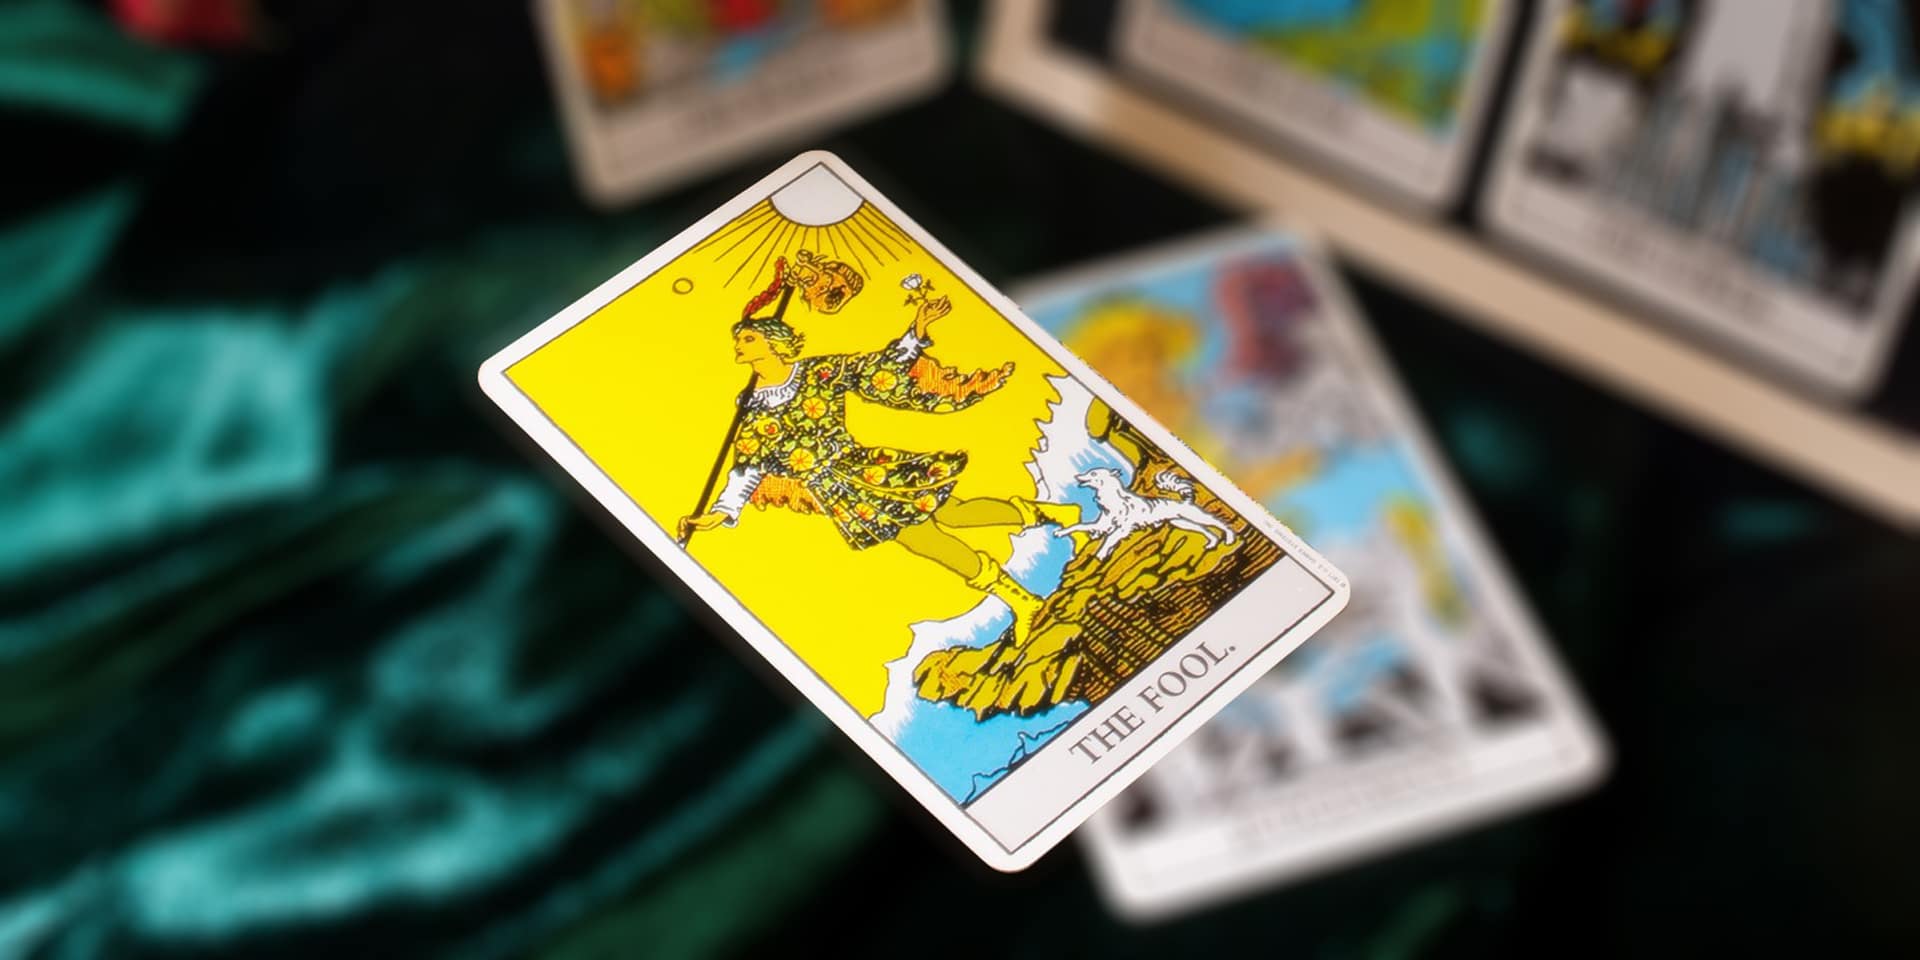 A metaphysical tarot card named "the fool" prominently displayed in focus, with other blurred cards in the background, suggestive of a tarot reading in progress.